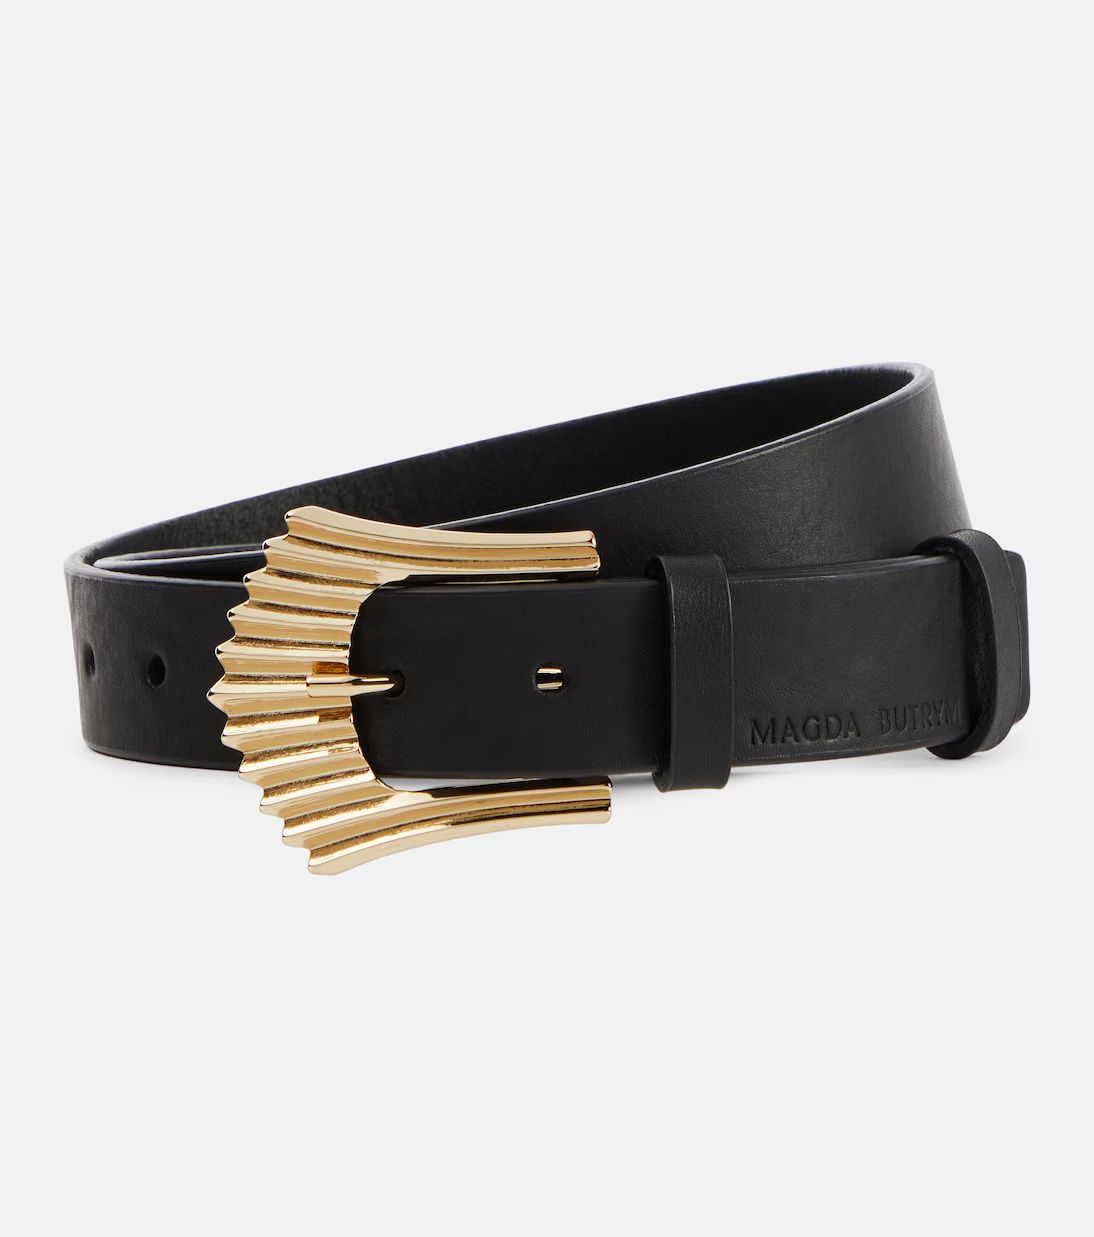 Magda ButrymLeather belt $ 201incl. duties and handling fees; excl. taxes and shipping costsSize ... | Mytheresa (US/CA)